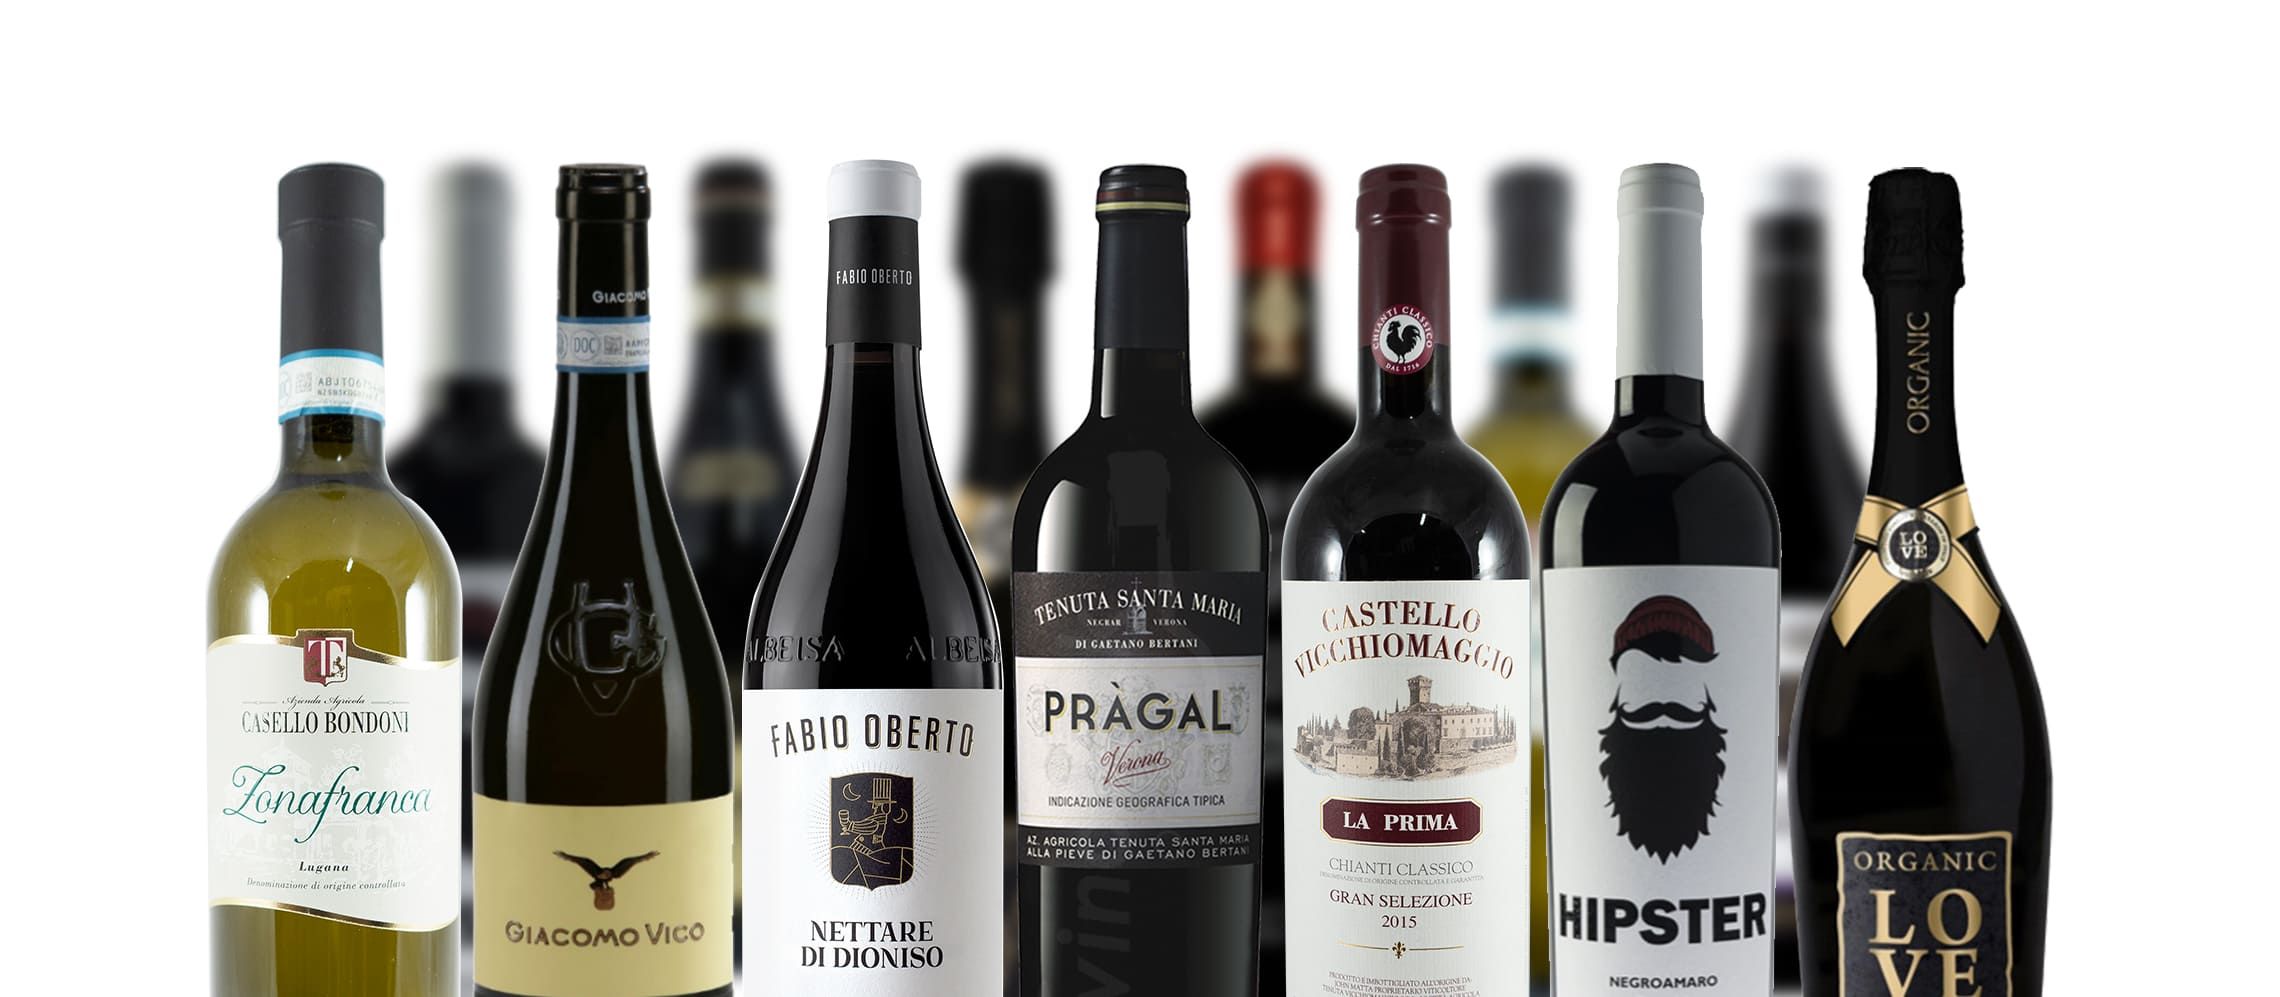 Photo for: Top 10 Italian Wines of 2019 for Your Wine Bar